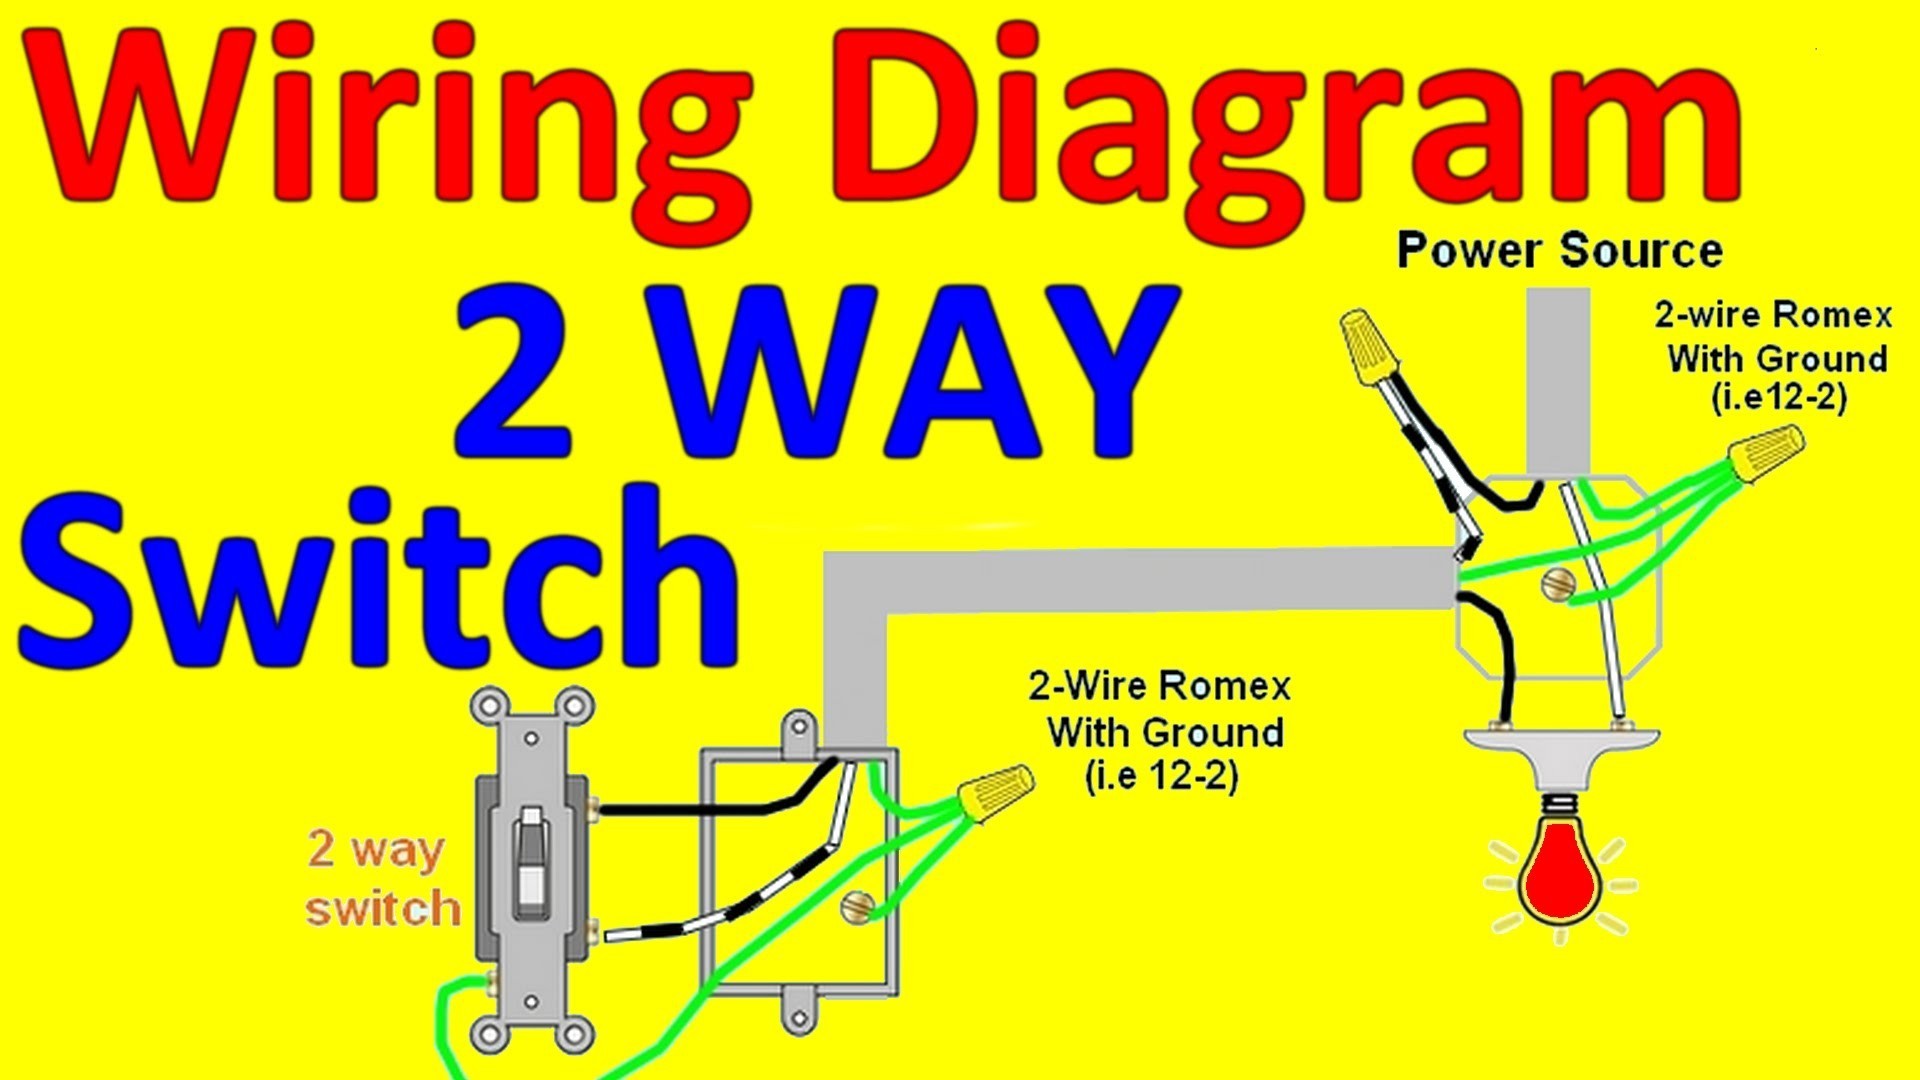 Wiring Diagram For Light With Two Switches Refrence 2 Way Light Switch Wiring Diagrams